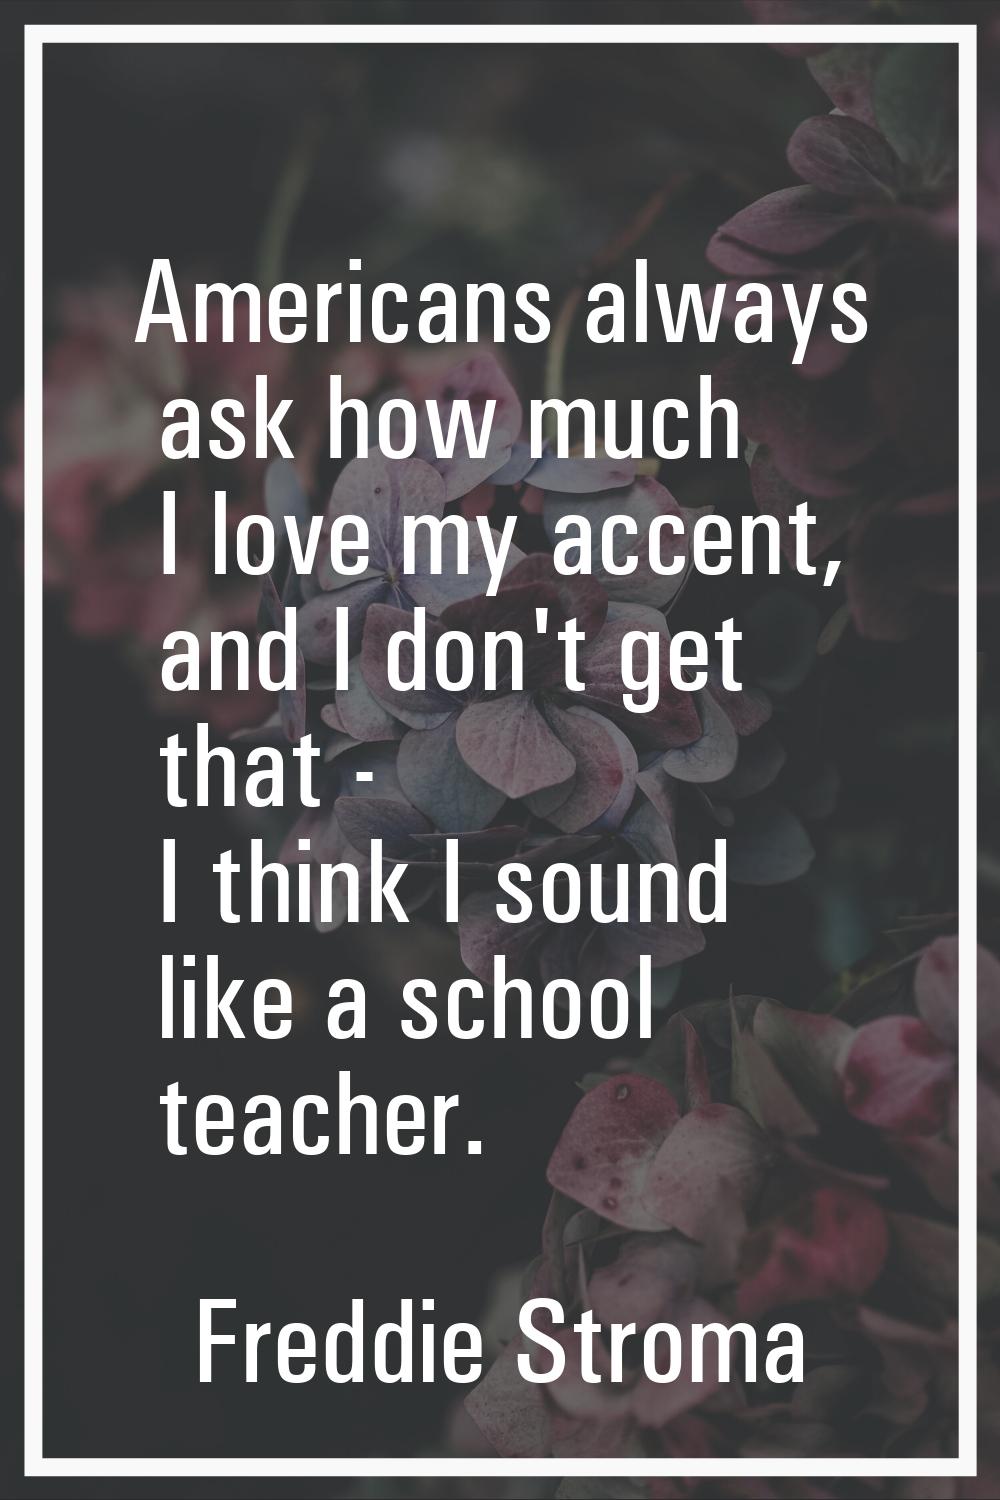 Americans always ask how much I love my accent, and I don't get that - I think I sound like a schoo